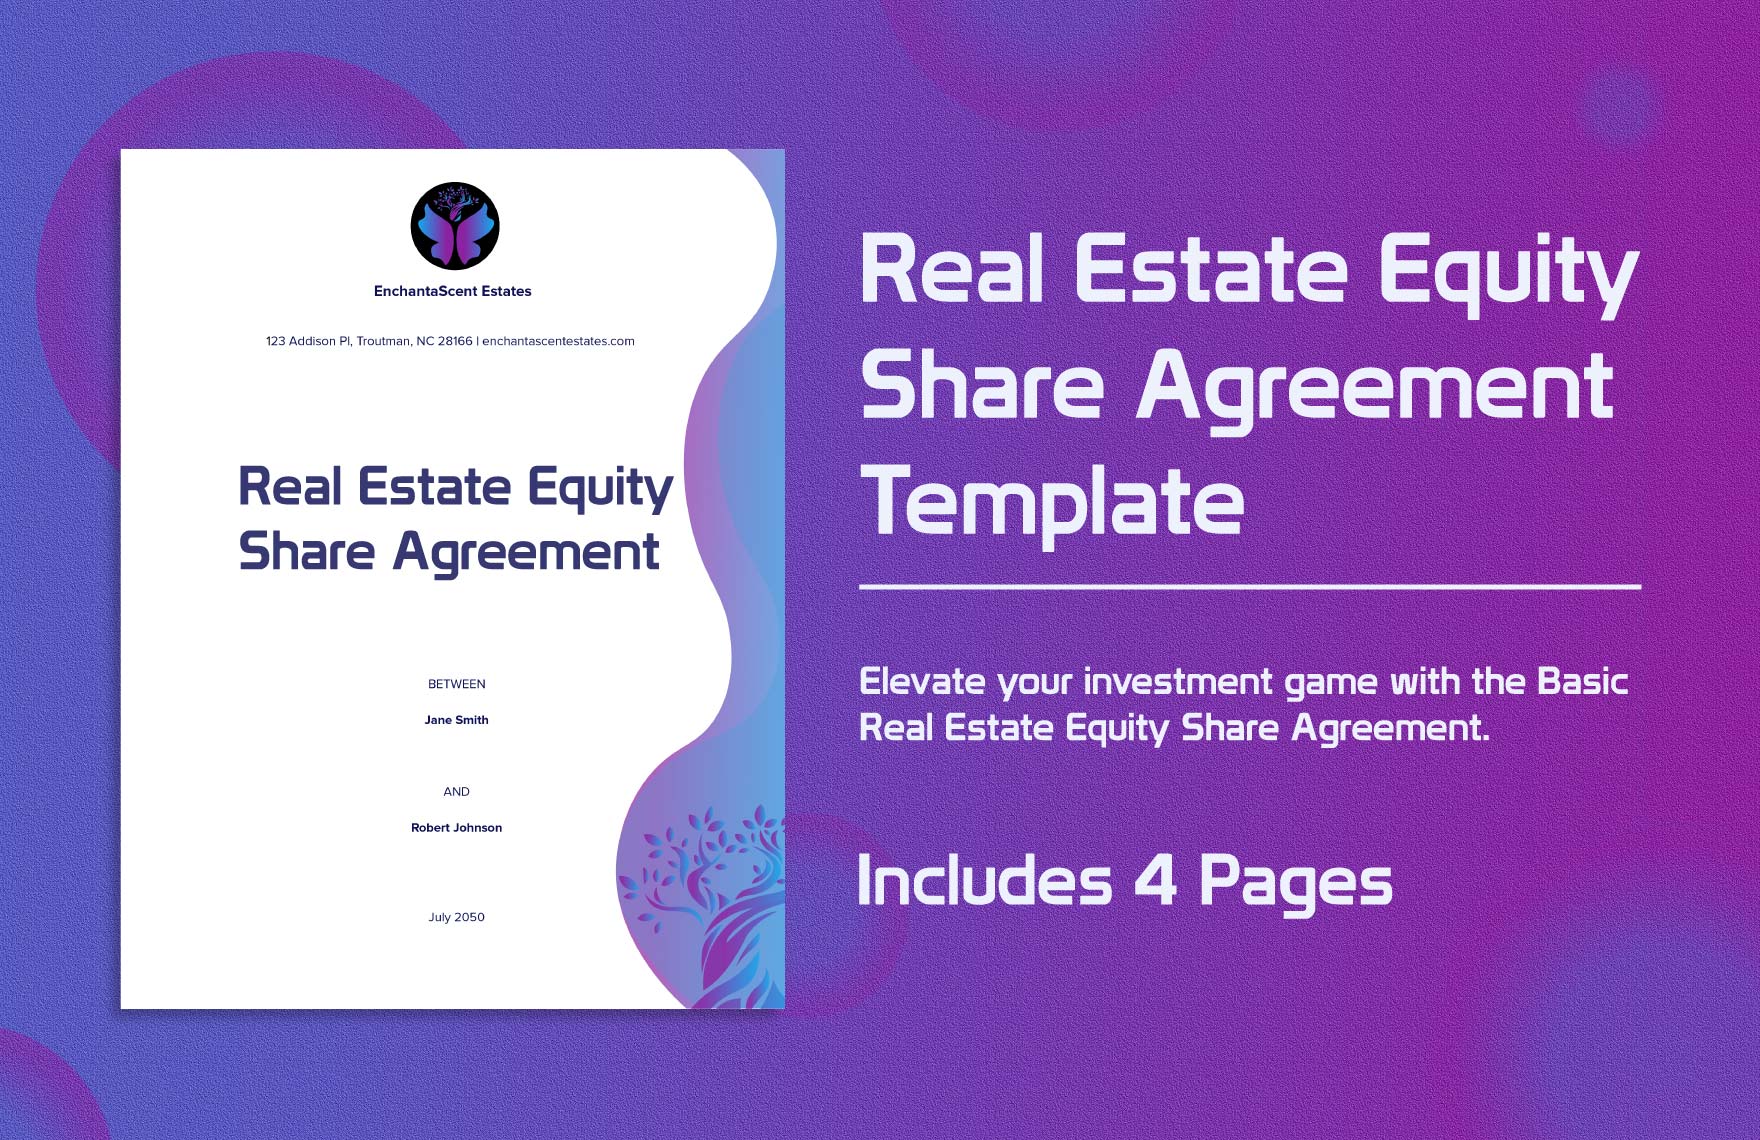  Basic Real Estate Equity Share Agreement